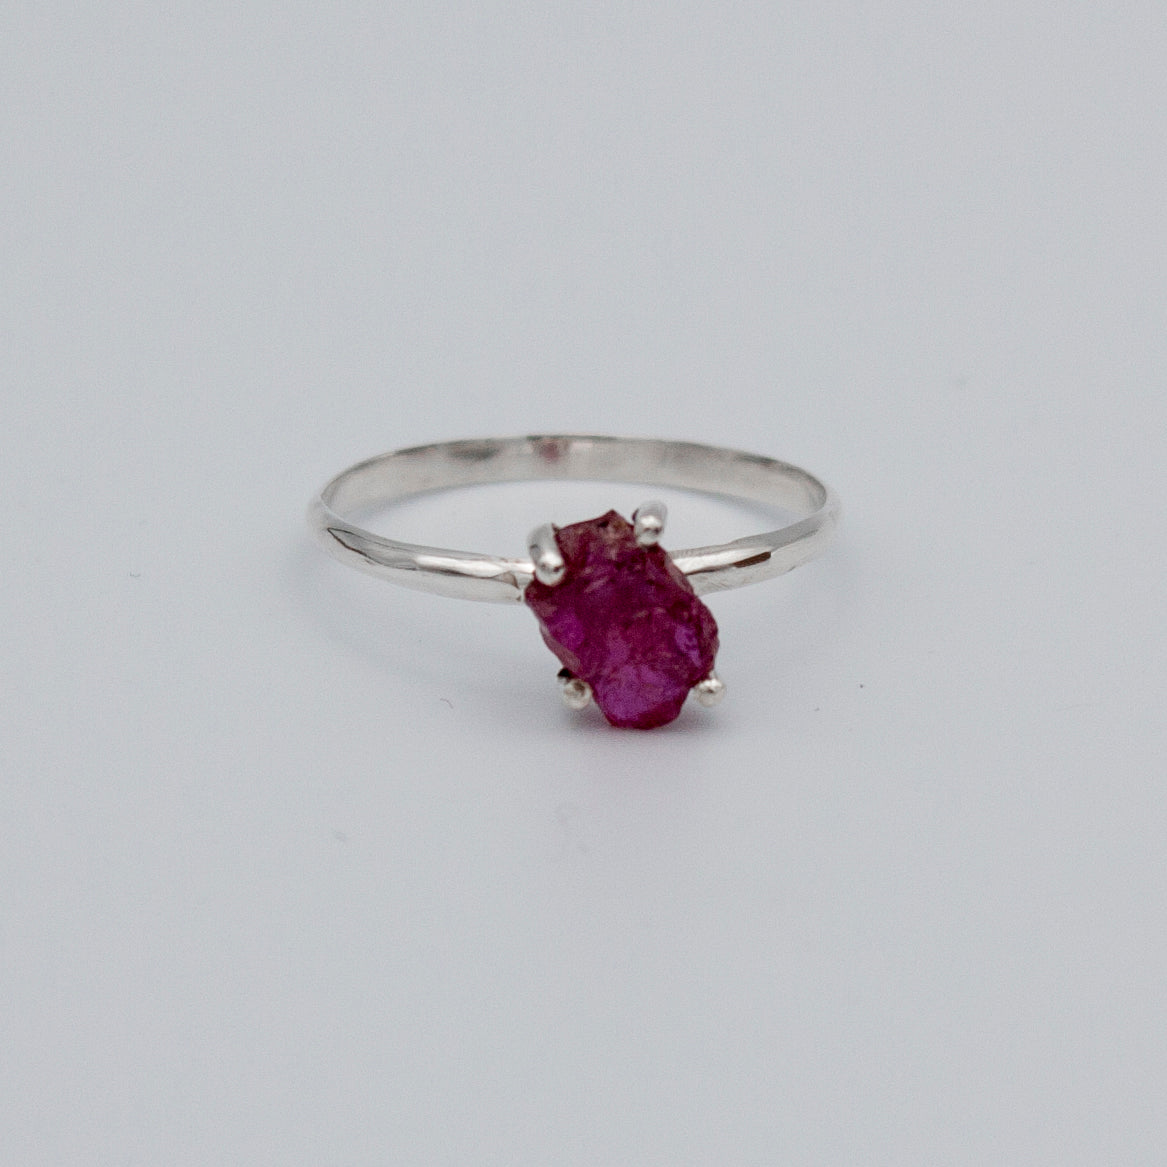 Raw Ruby Solitaire Prong Sterling Silver Birthstone Ring - Jewelry & Watches - Bijou Her -  -  - 